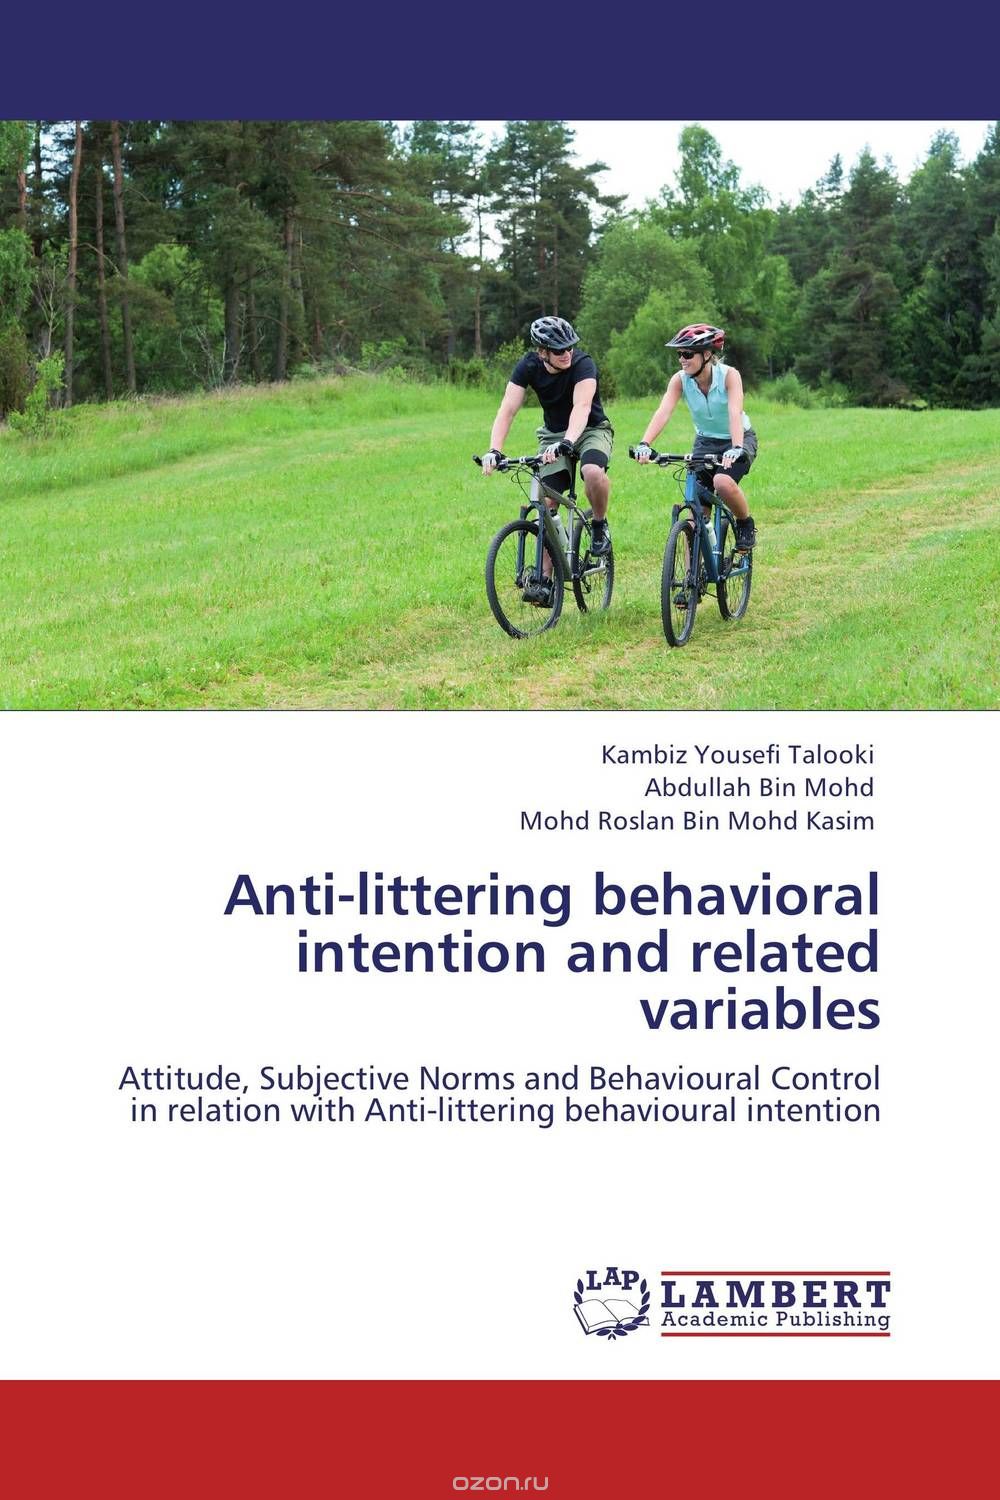 Скачать книгу "Anti-littering behavioral intention and related variables"